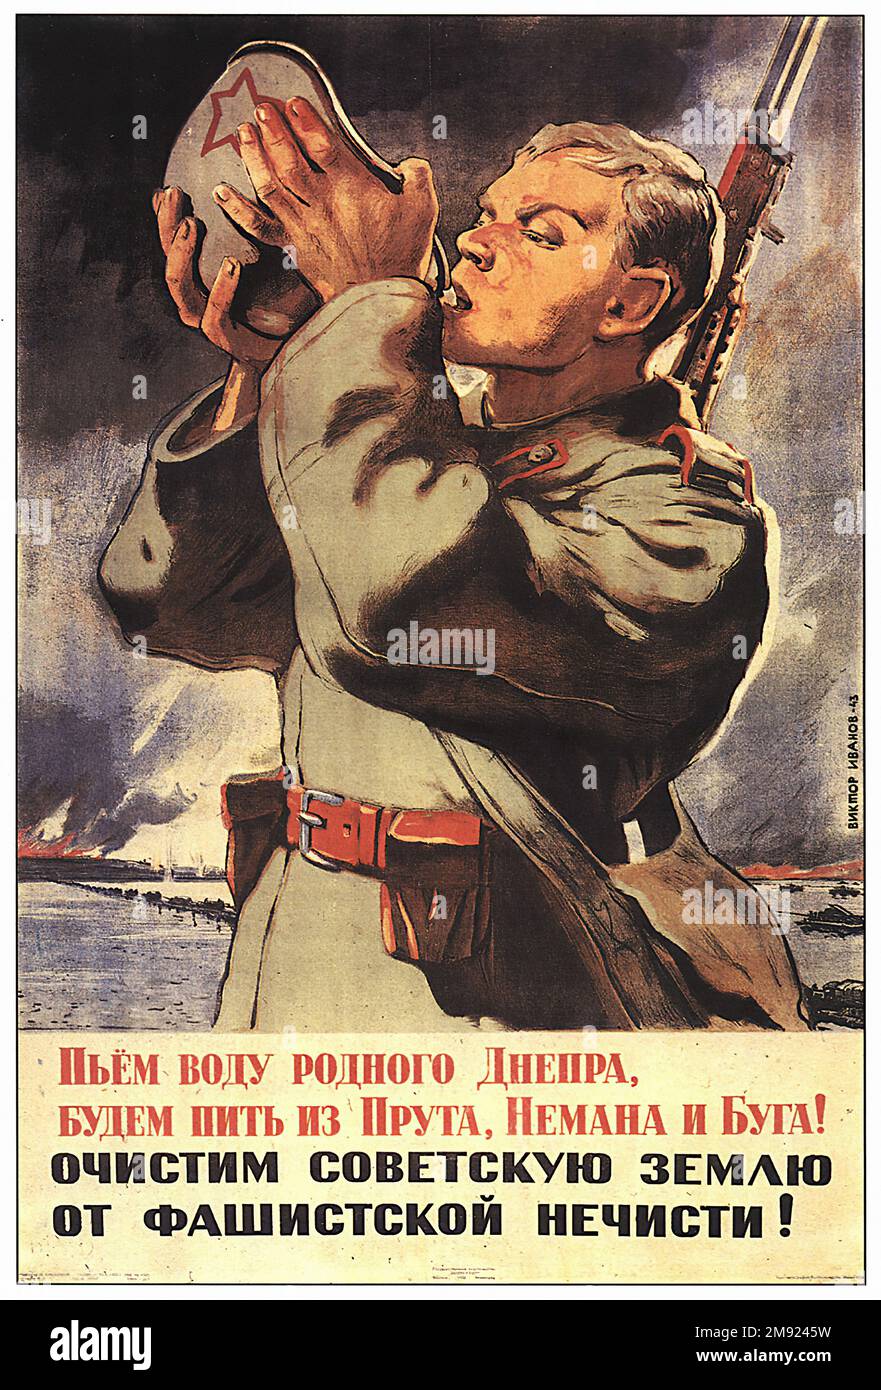 Water From The Dneper (Translated from Russian) - Vintage USSR soviet propaganda poster Stock Photo